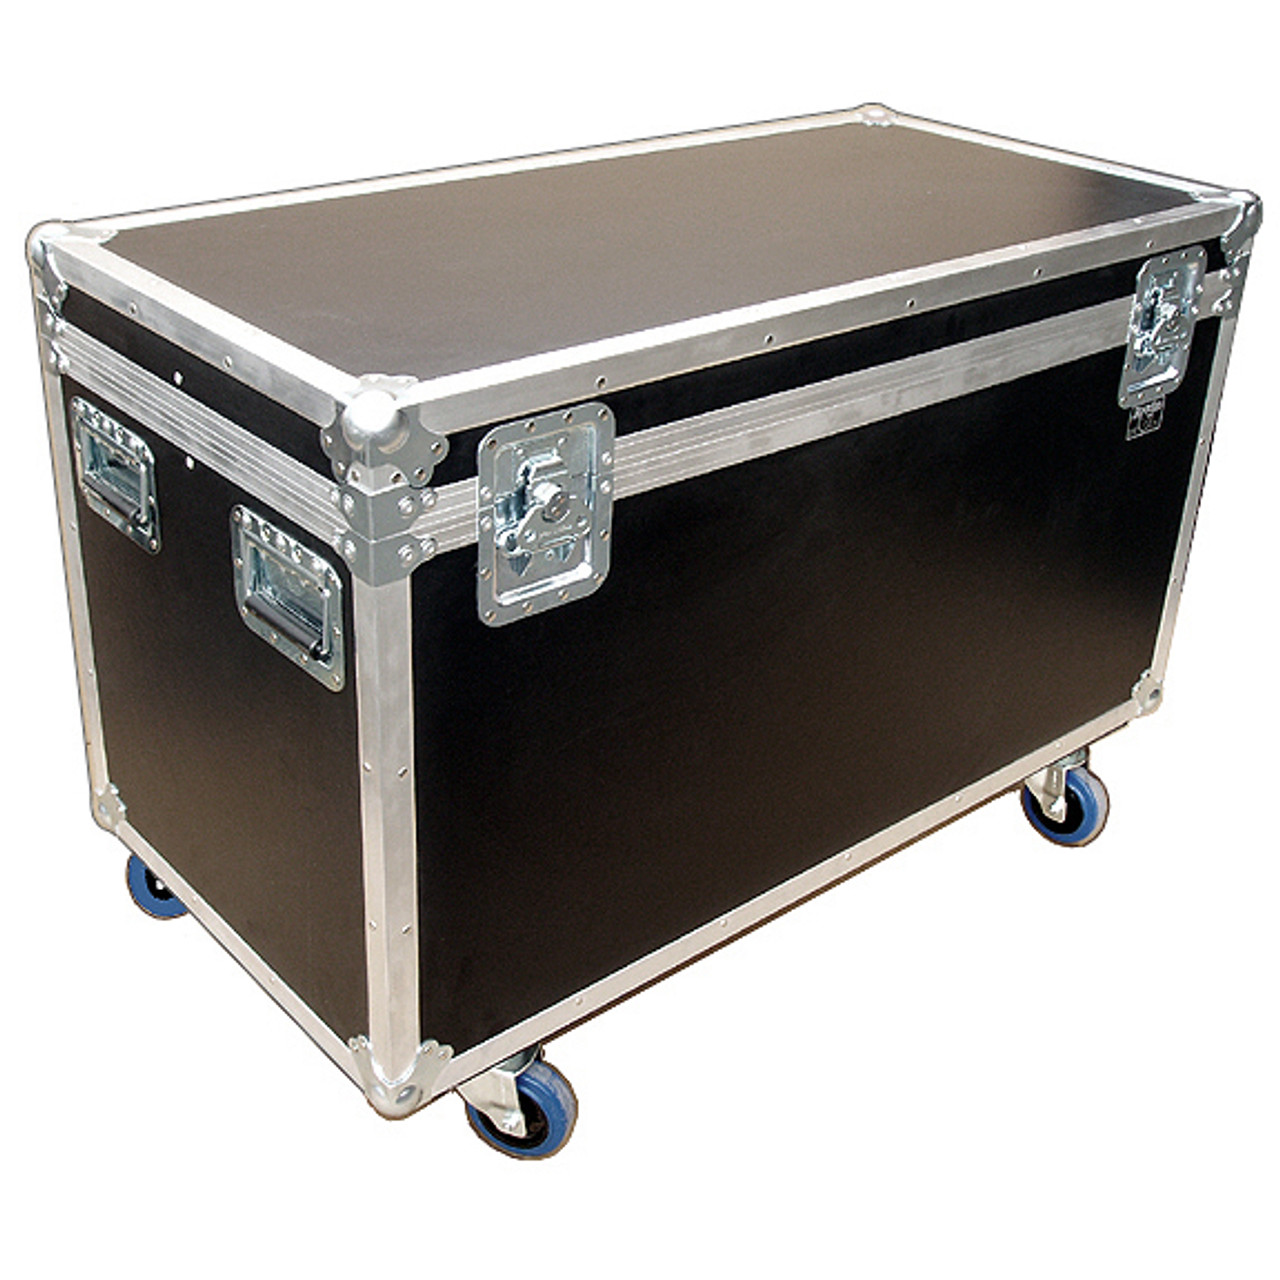 False Cable Trunk 'Mini Size' 30x22 ATA Case - Heavy Duty 3/8 Ply w/Wheels - Standard High - Truck Pack Size